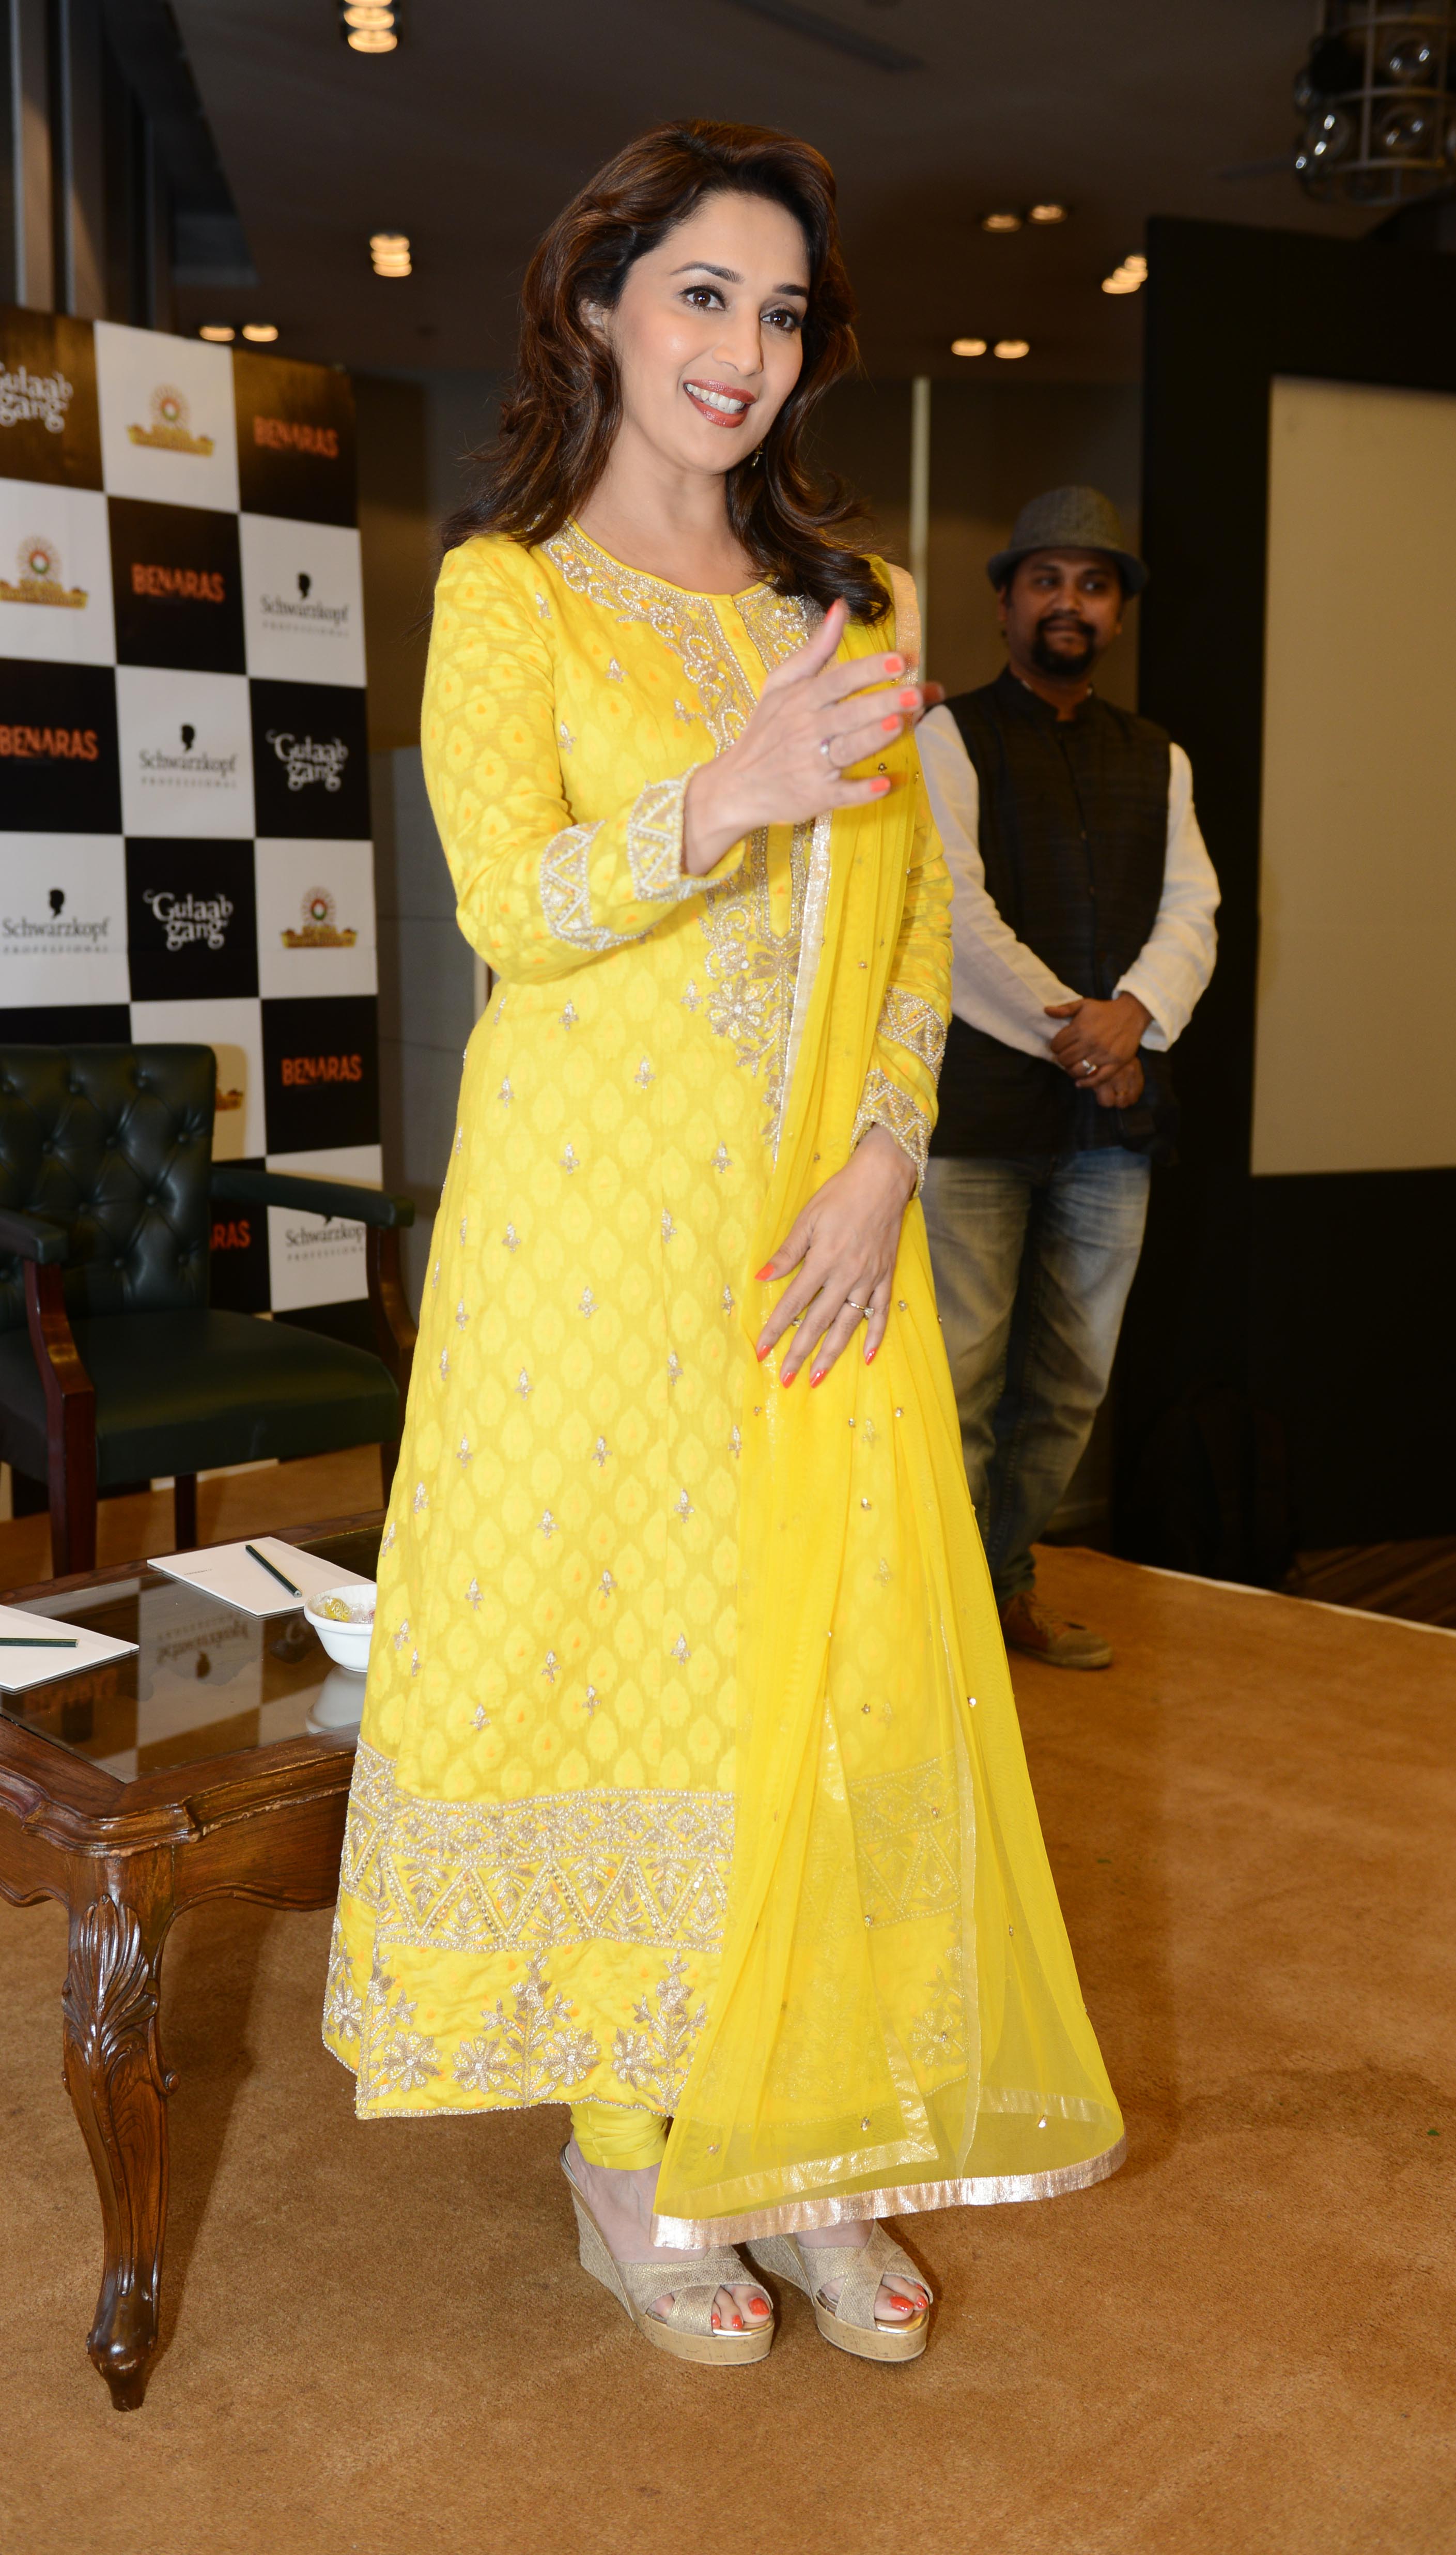 Madhuri Dixit in Anita Dongre for her films promotion in Delhi 2